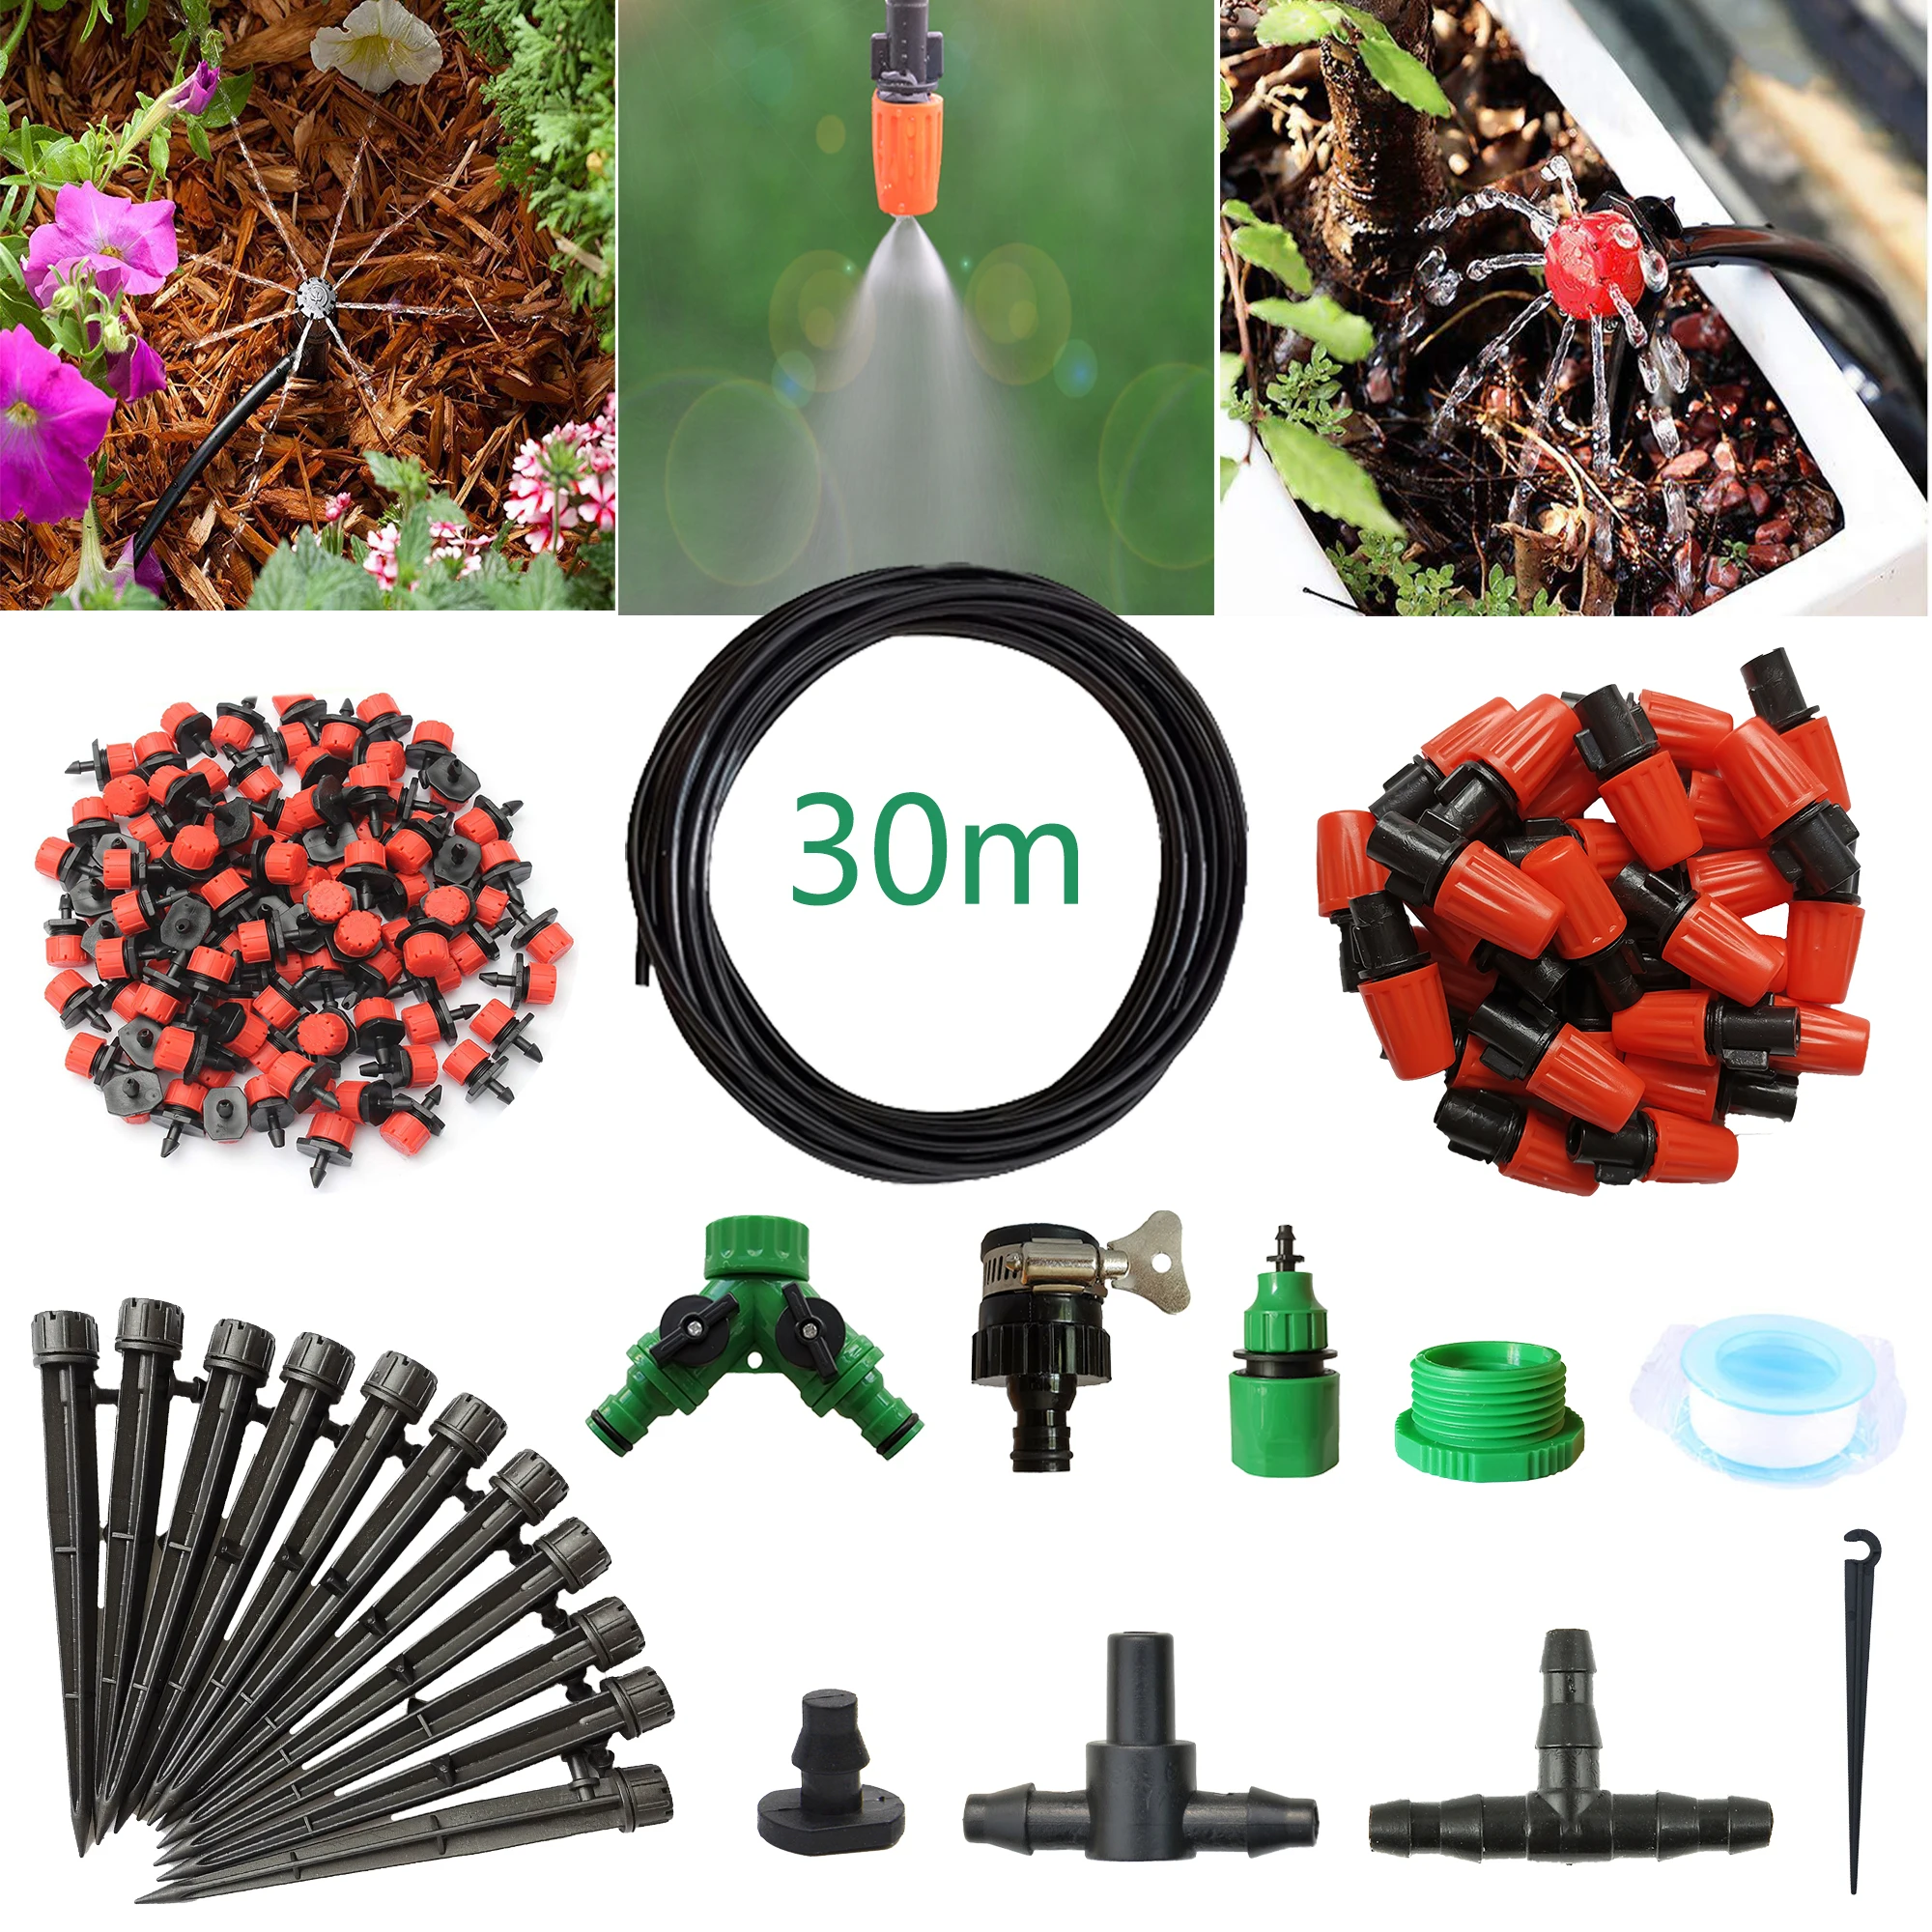 

Drip Irrigation Kit;DIY Patio Plant Watering Kit;Garden Irrigation System;Misting Cooling System with Mister Nozzle Sprinkler fo